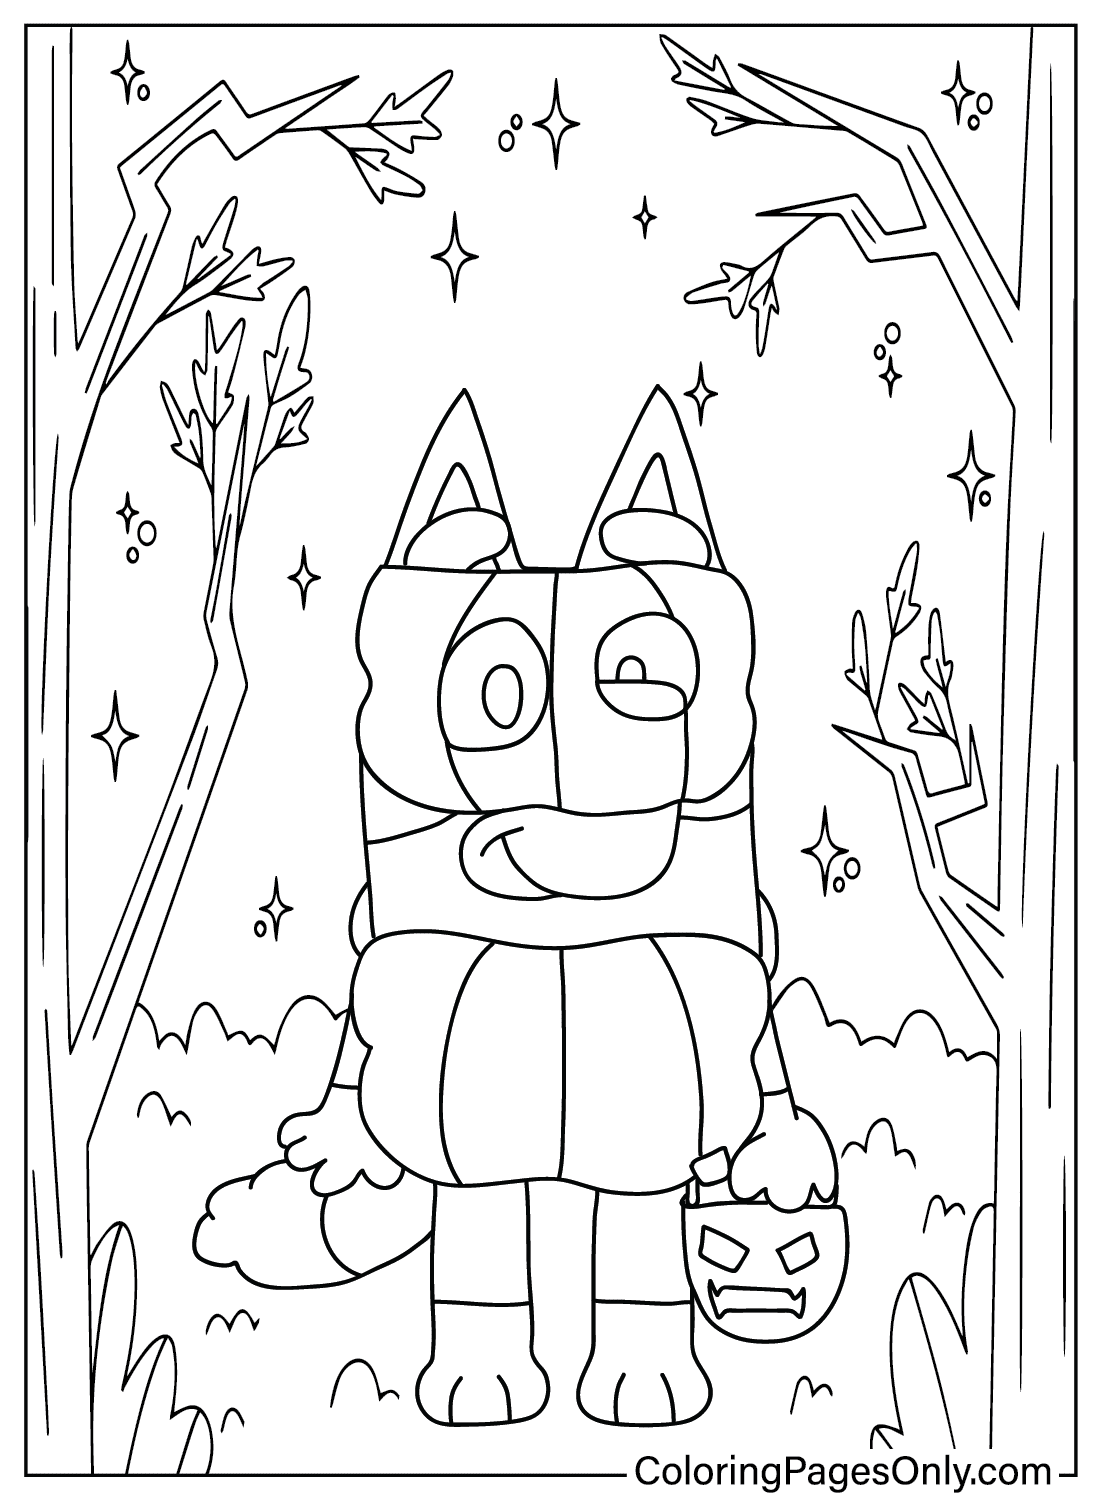 Print Bluey Halloween Coloring Page from Bluey Halloween